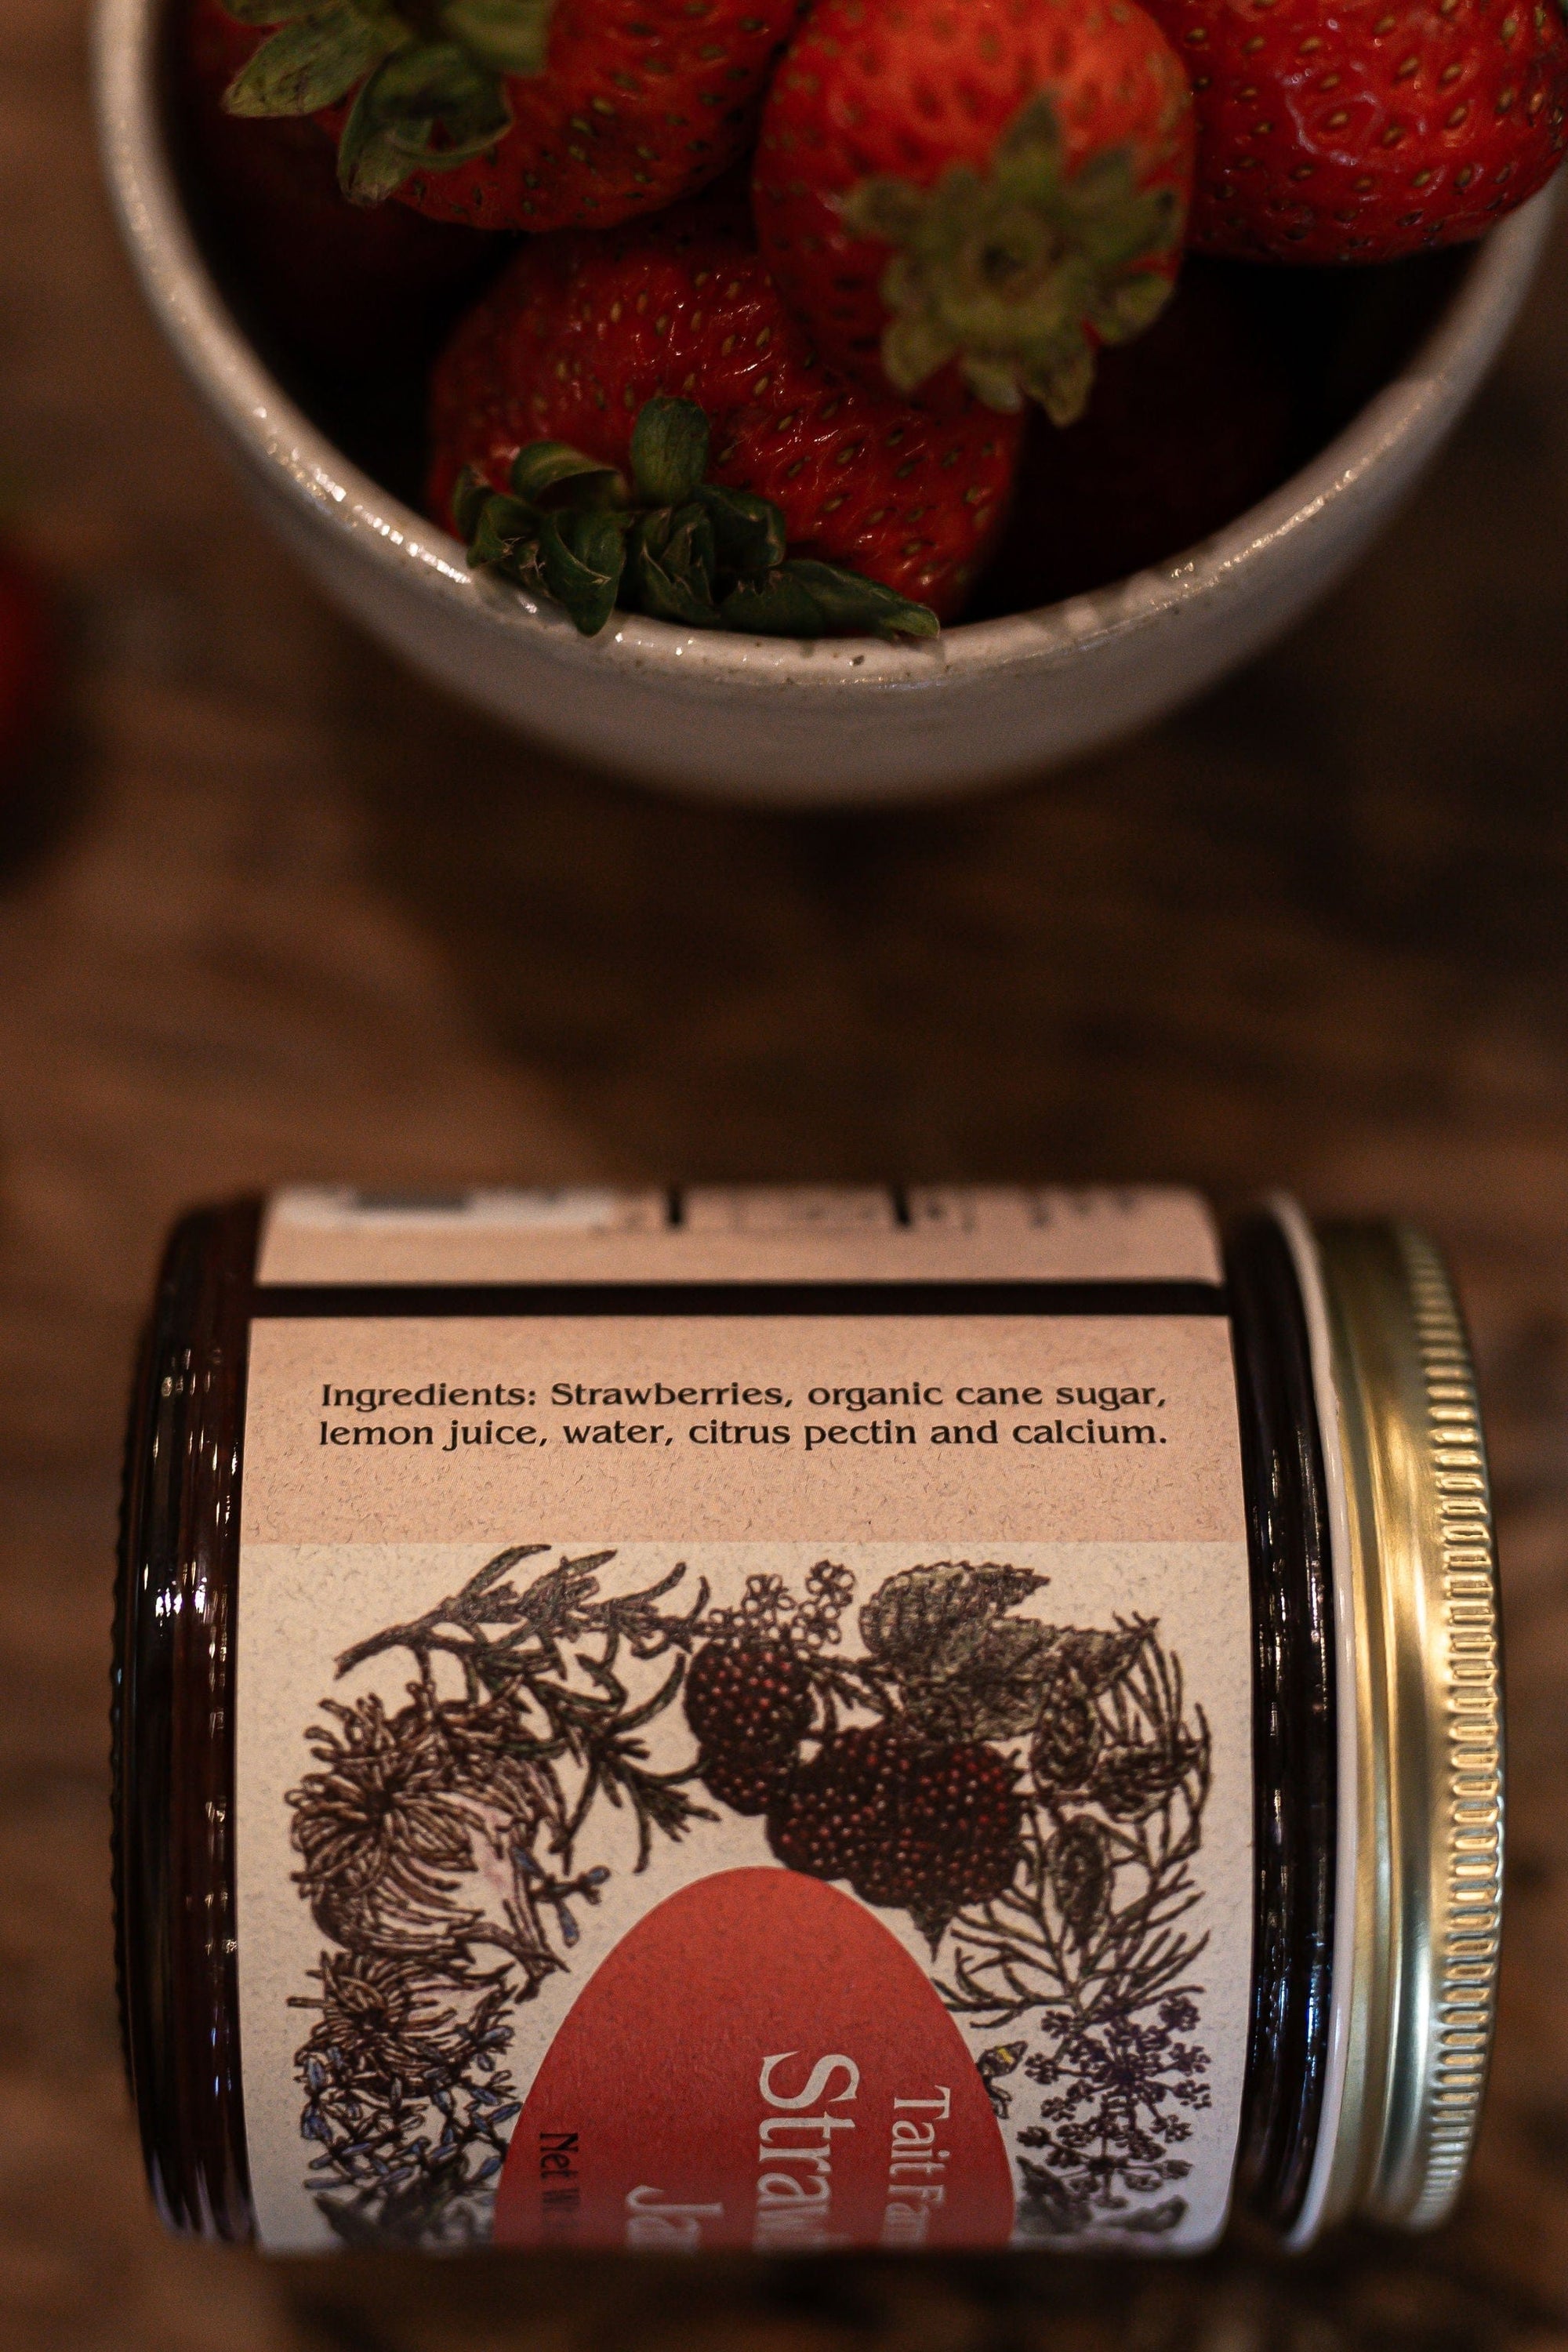 Tait Farm Foods Syrups/Sauces/Spreads Strawberry Jam